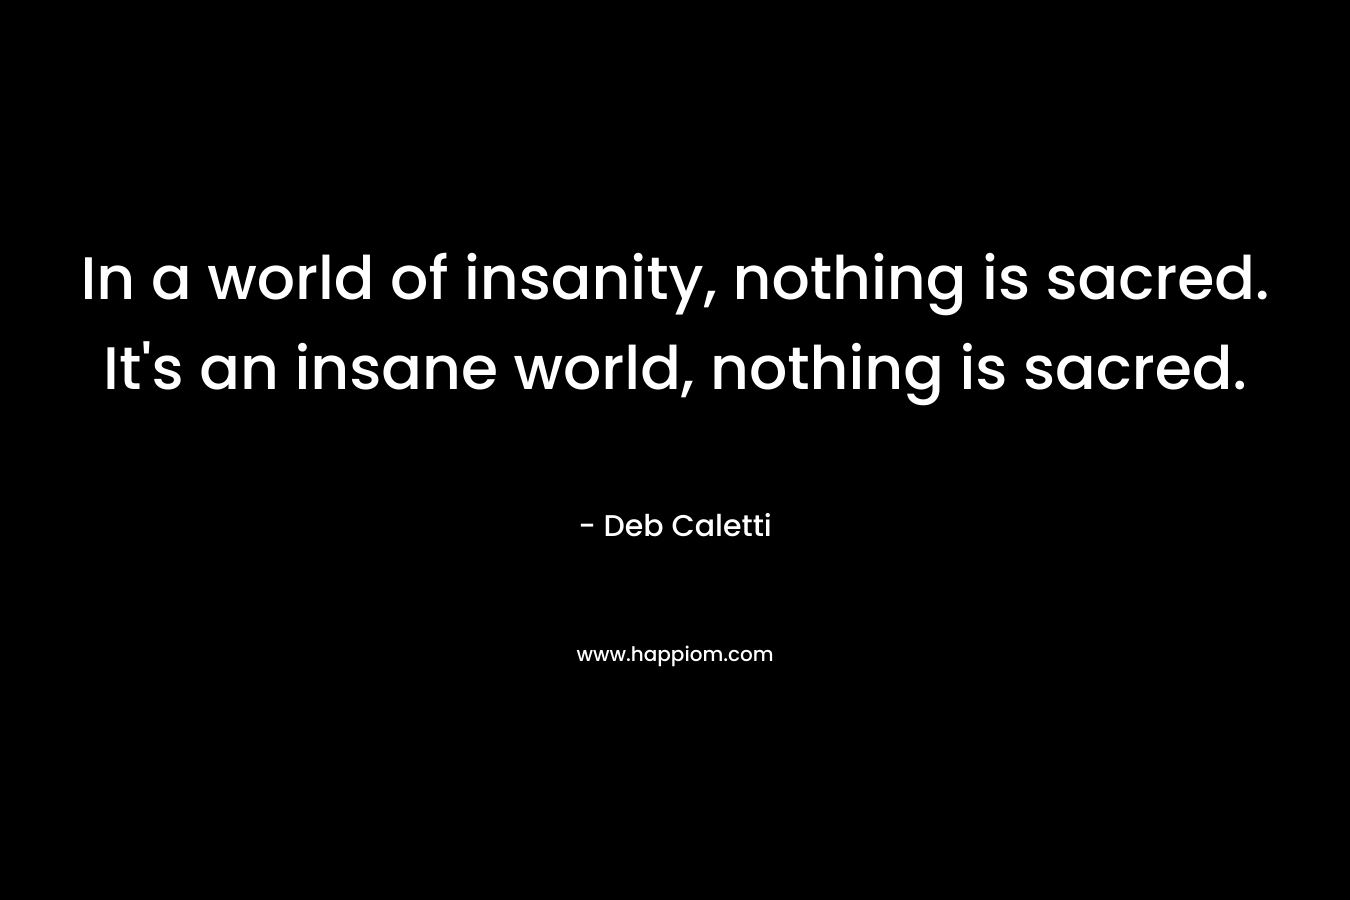 In a world of insanity, nothing is sacred. It's an insane world, nothing is sacred.